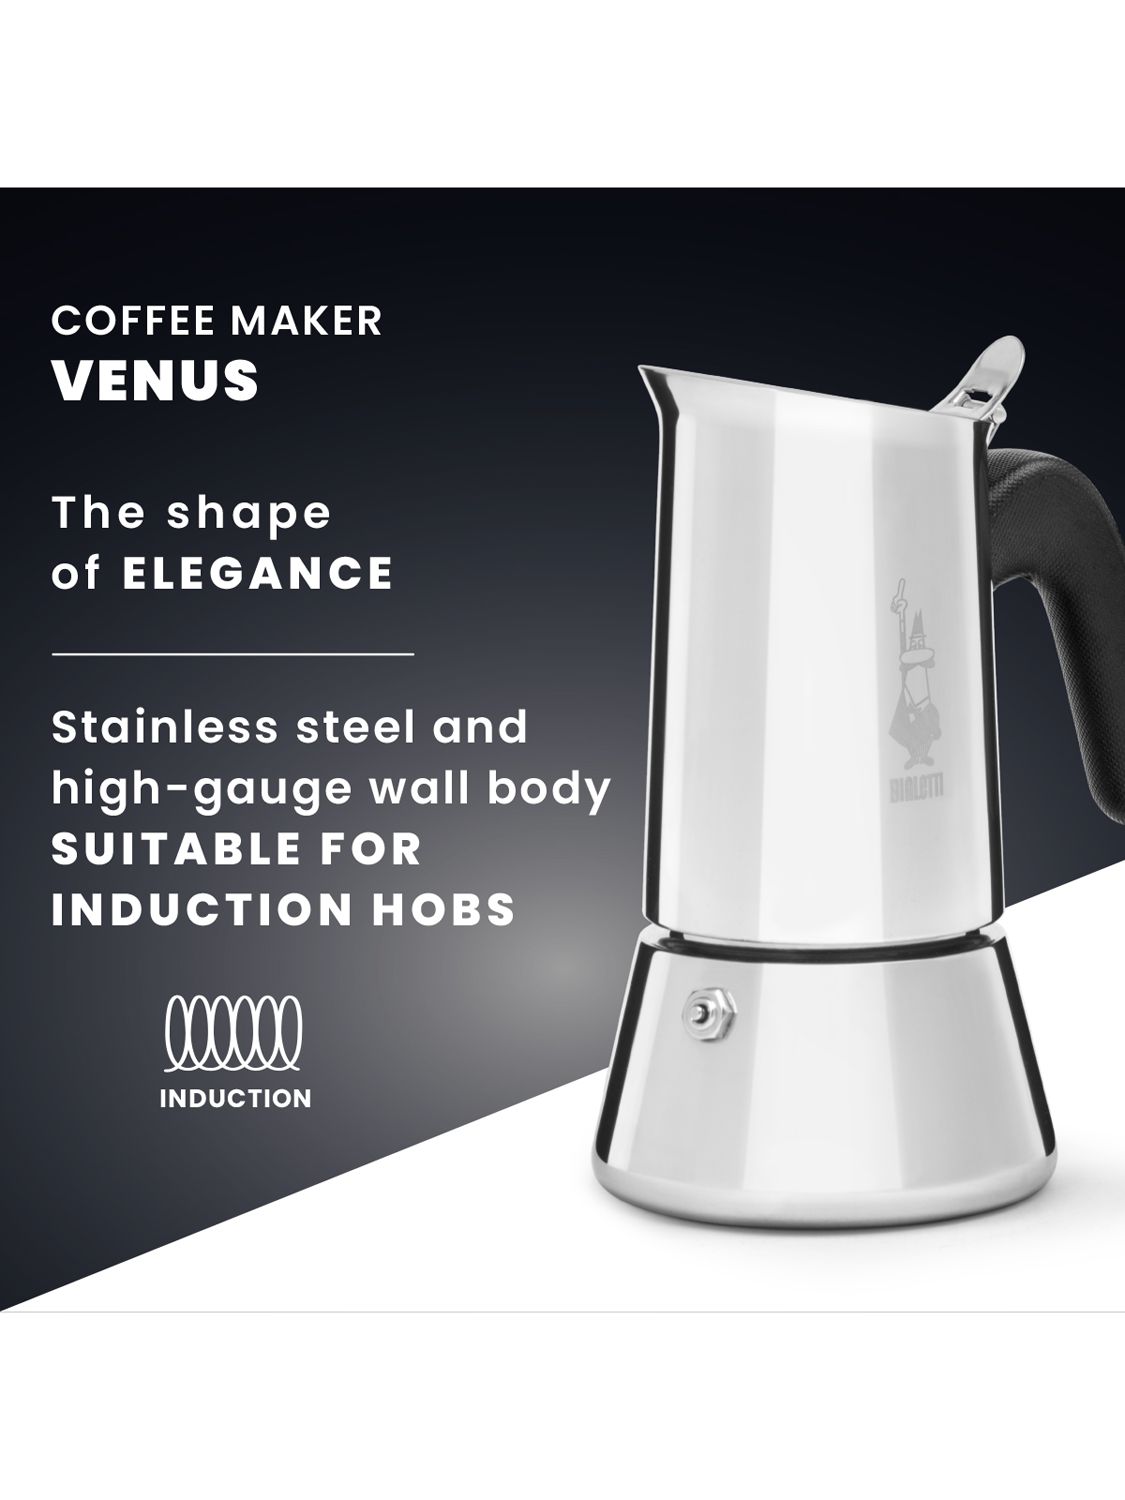 Bialetti Moka Express Stovetop Maker with Free Ground Coffee, 6-Cup &  Coffee, Silver 